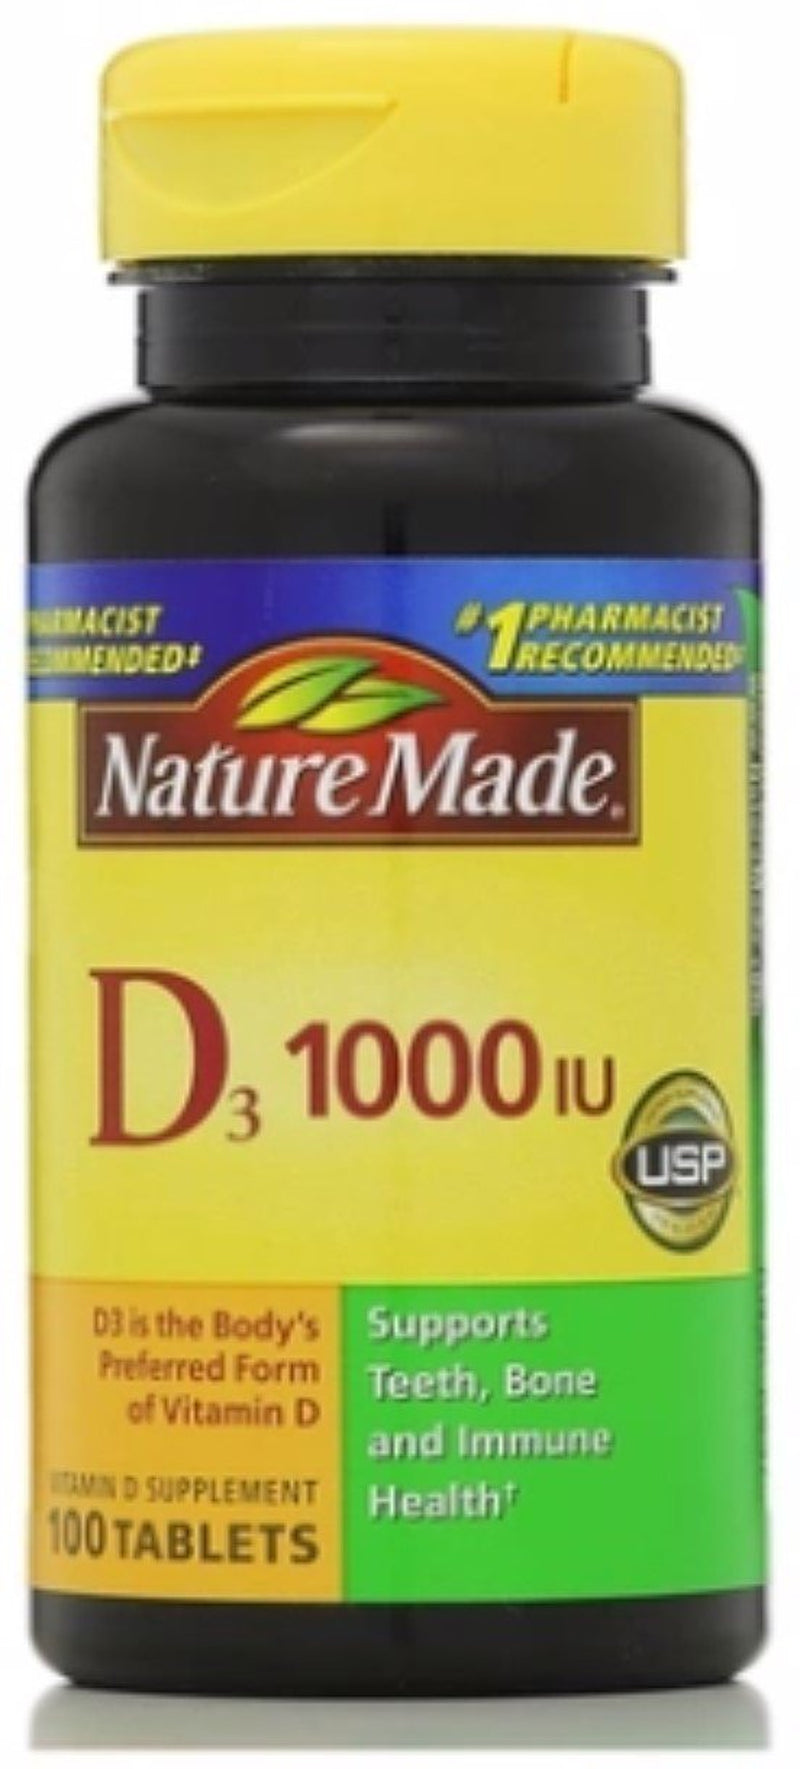 Nature Made Vitamin D 1000 IU Tablets 100 Ea (Pack of 6)